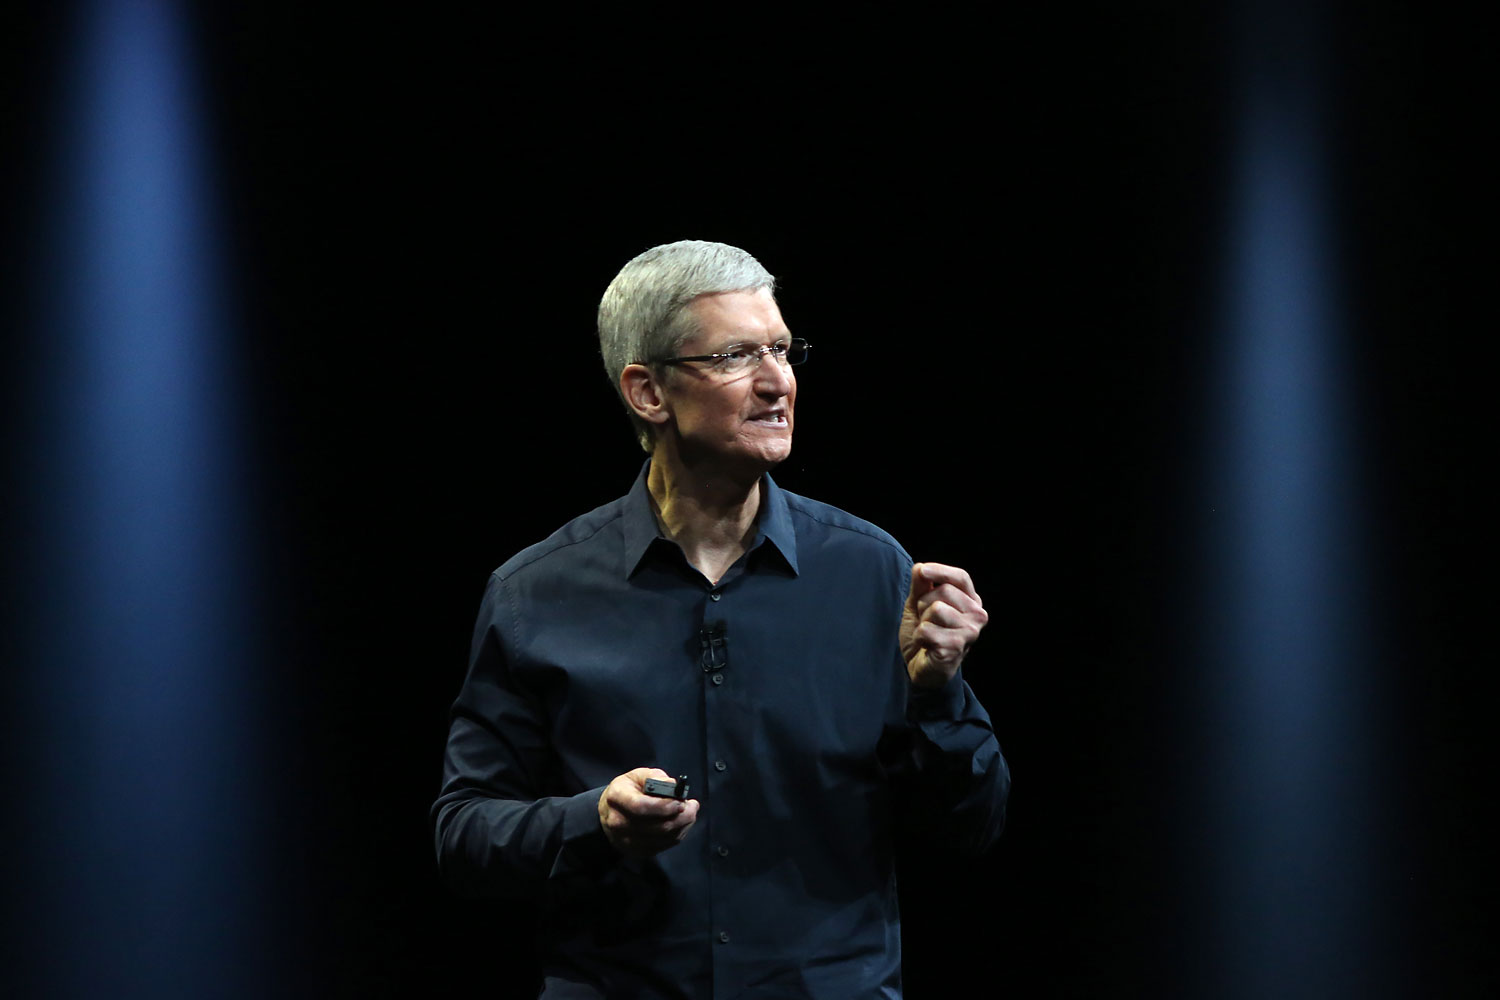 Apple CEO Tim Cook delivers his keynote address at the World Wide developers conference in San Francisco, June 2, 2014. (Robert Galbraith—Reuters)